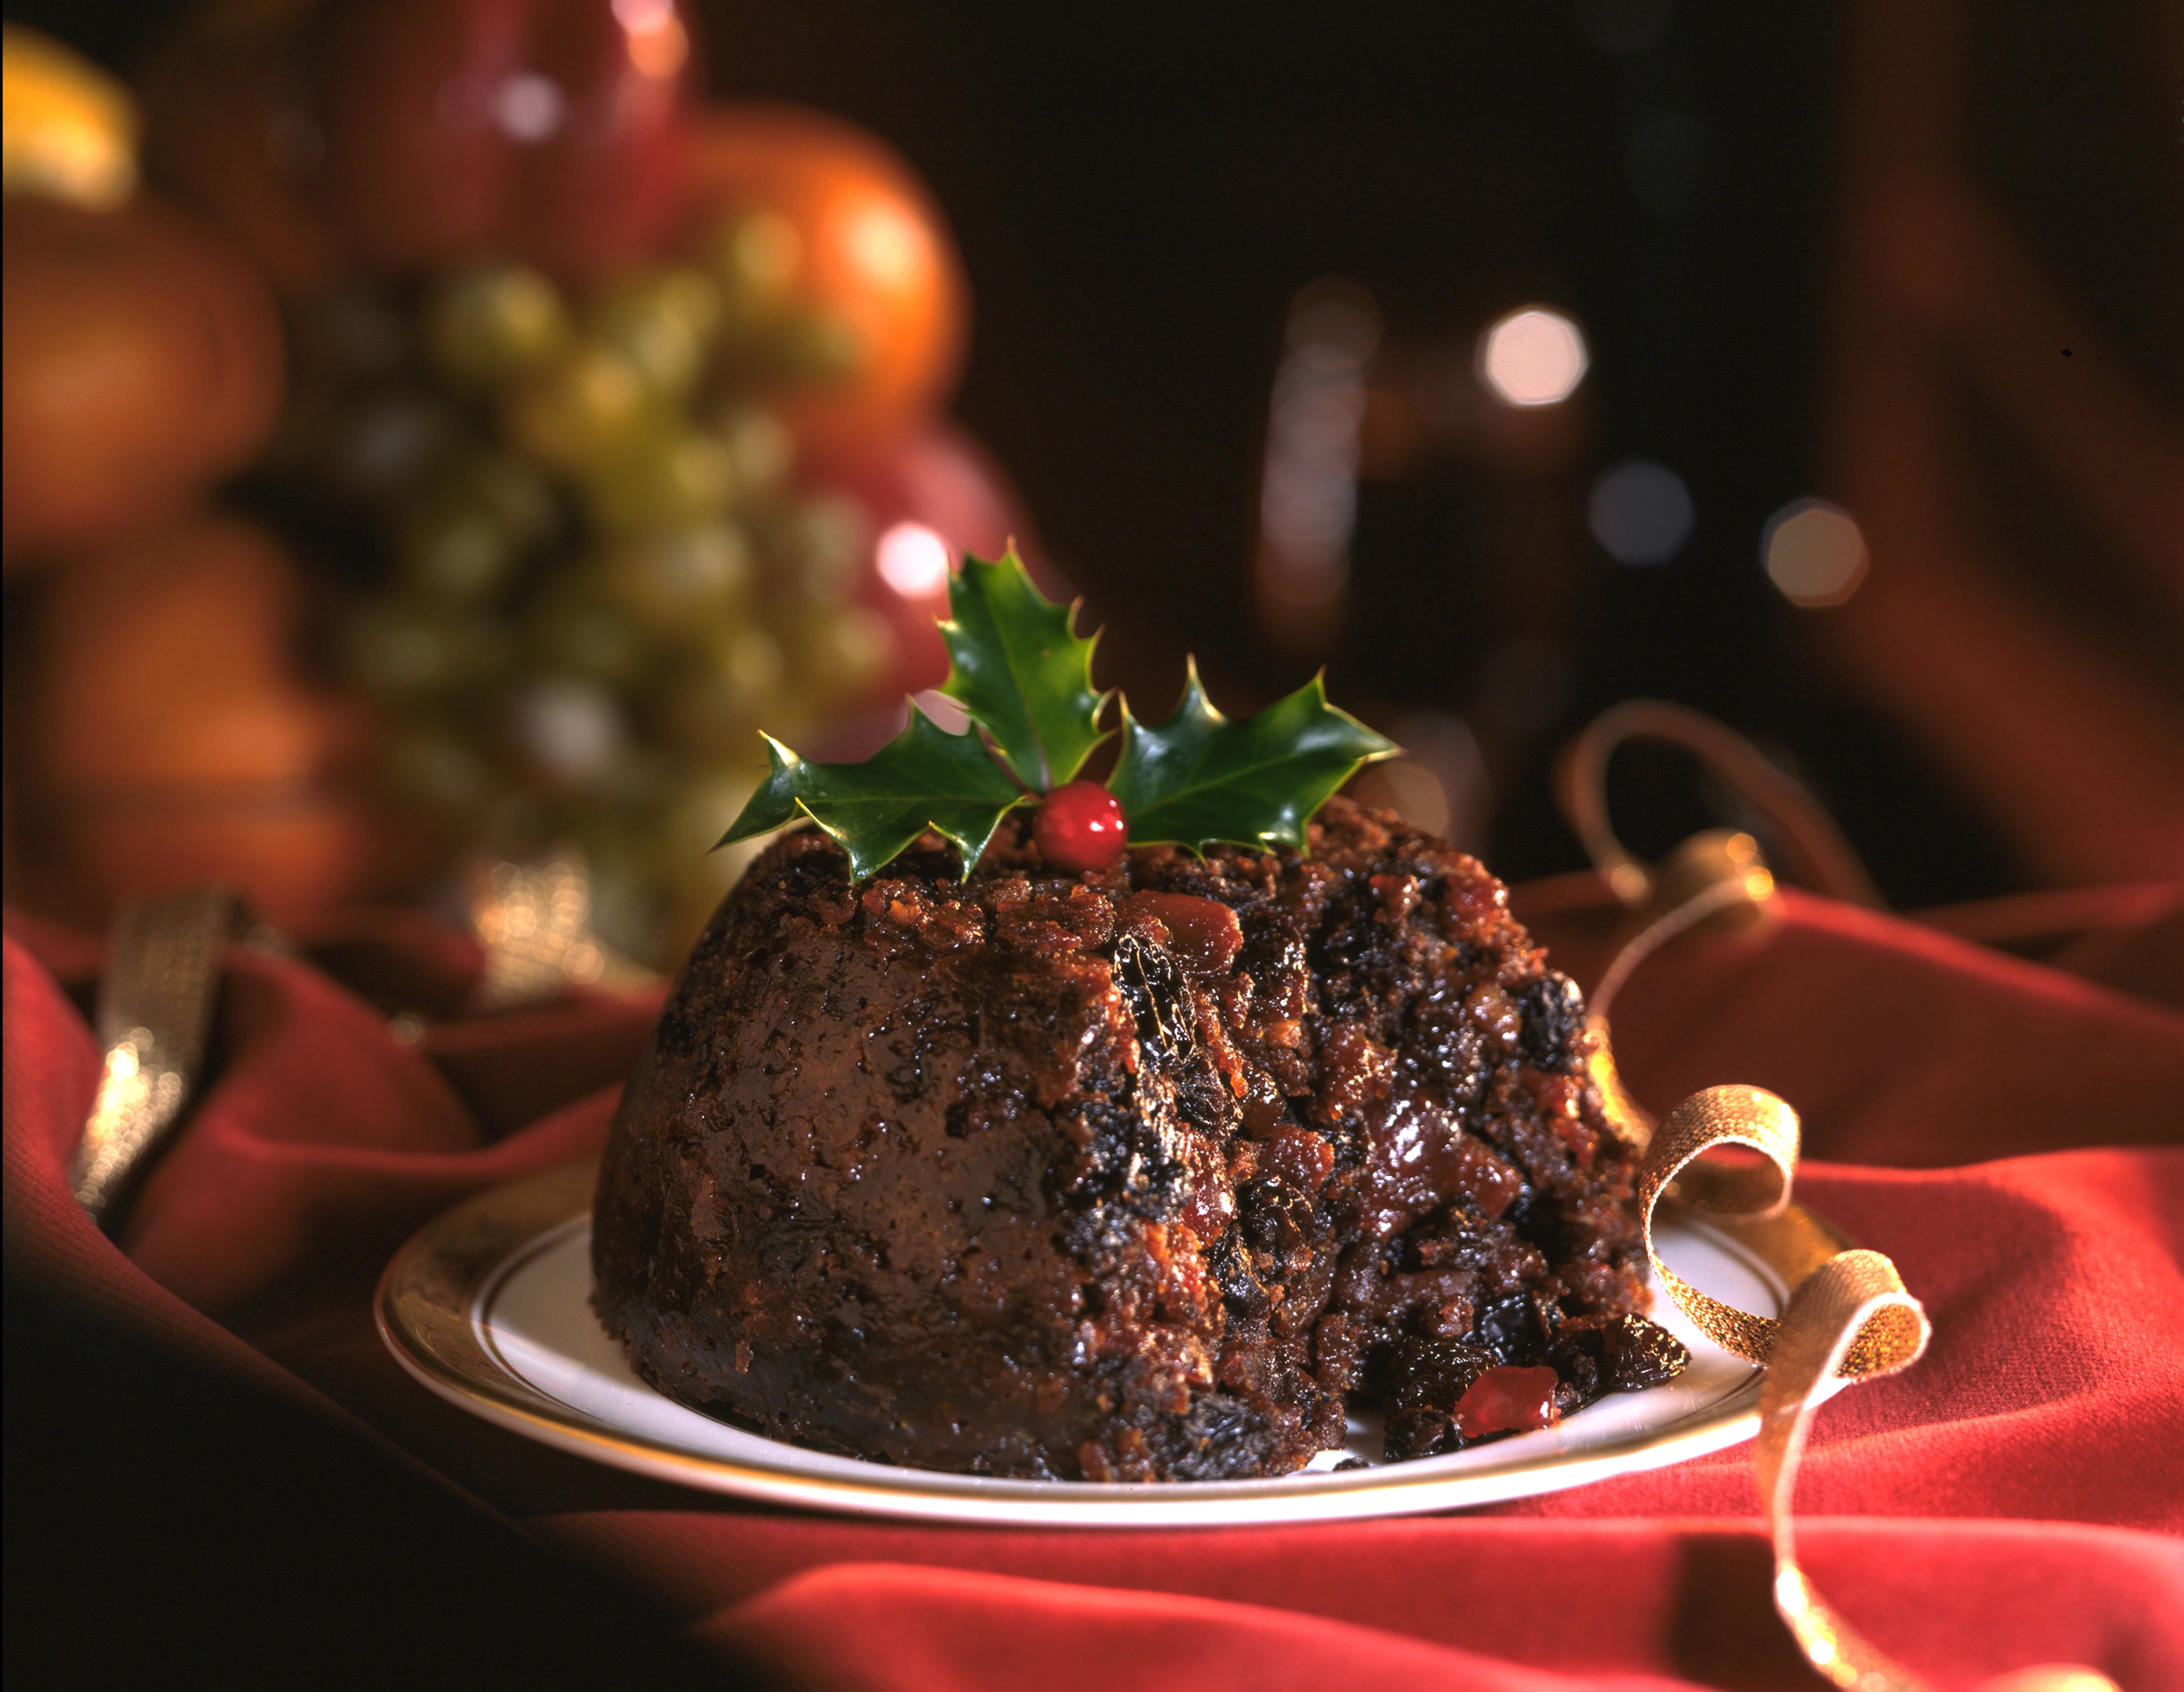 Christmas pudding with holly and ribbons